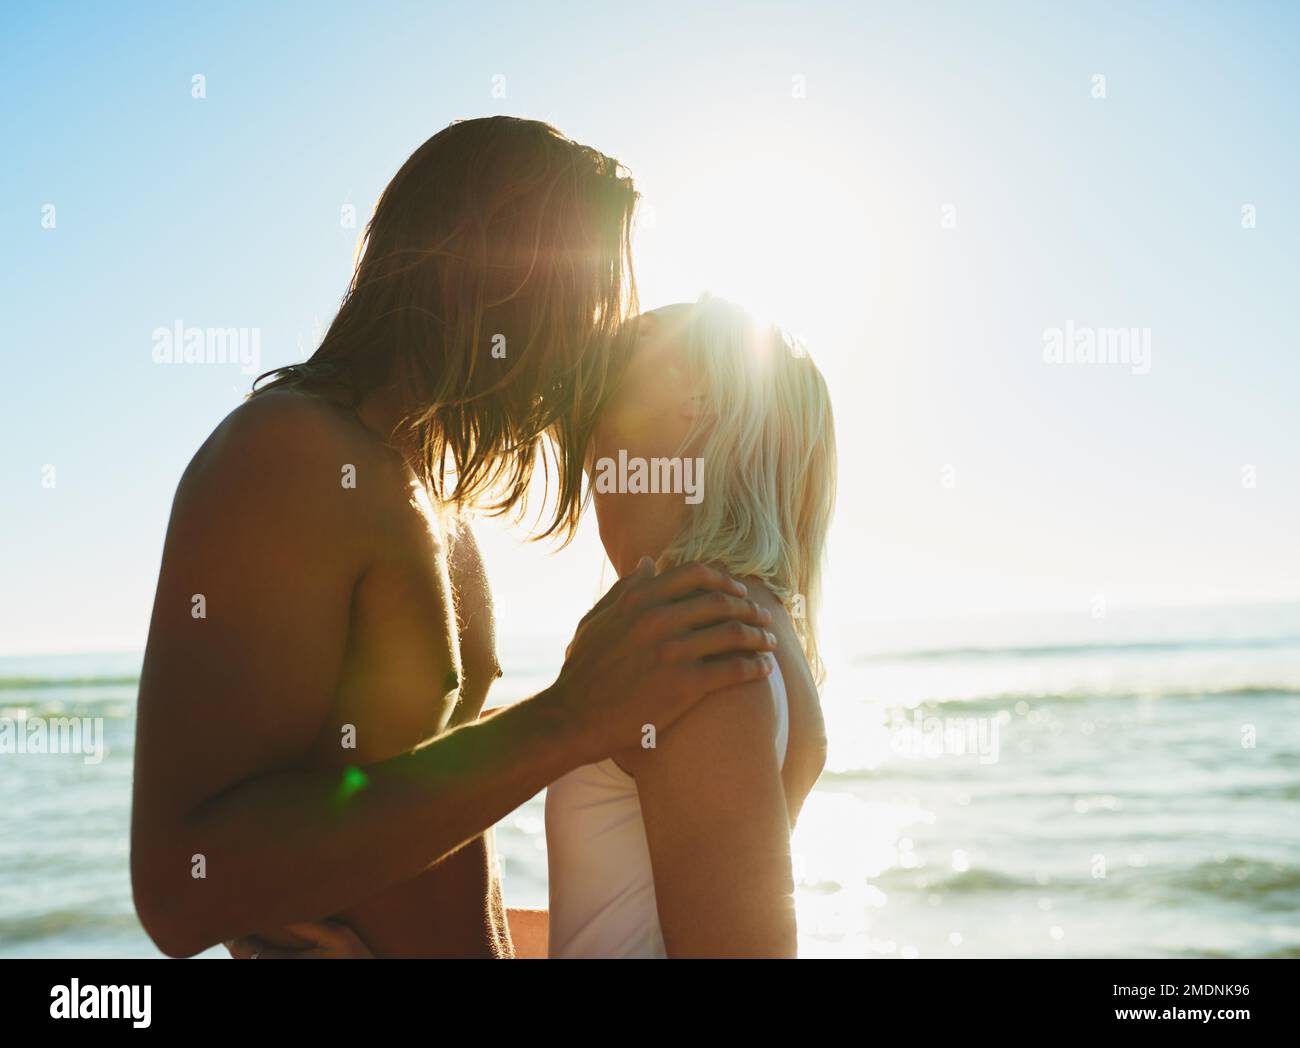 Youre the sunshine to all my days. an affectionate young couple kissing each other at the beach. Stock Photo